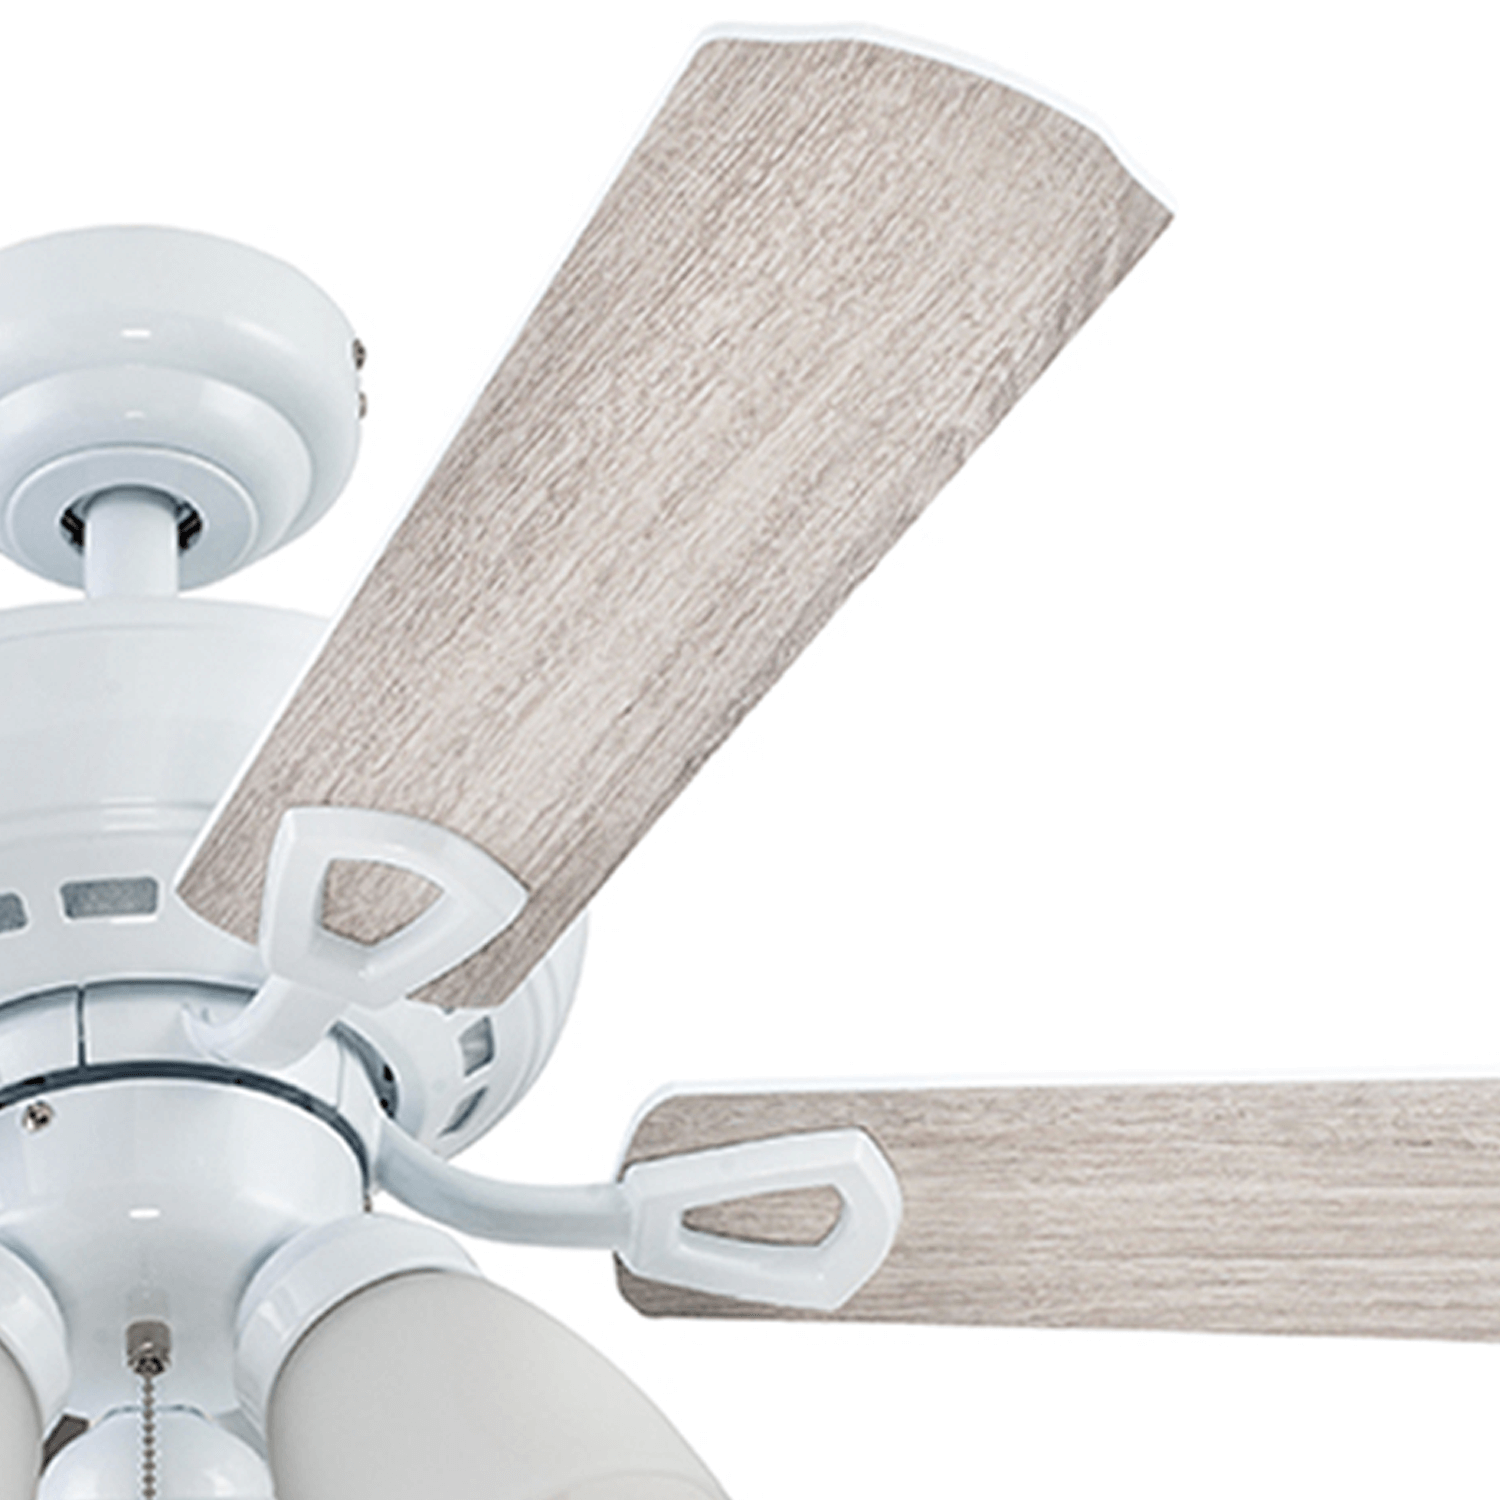 44 Inch Miller Park, White, Pull Chain, Ceiling Fan by Prominence Home